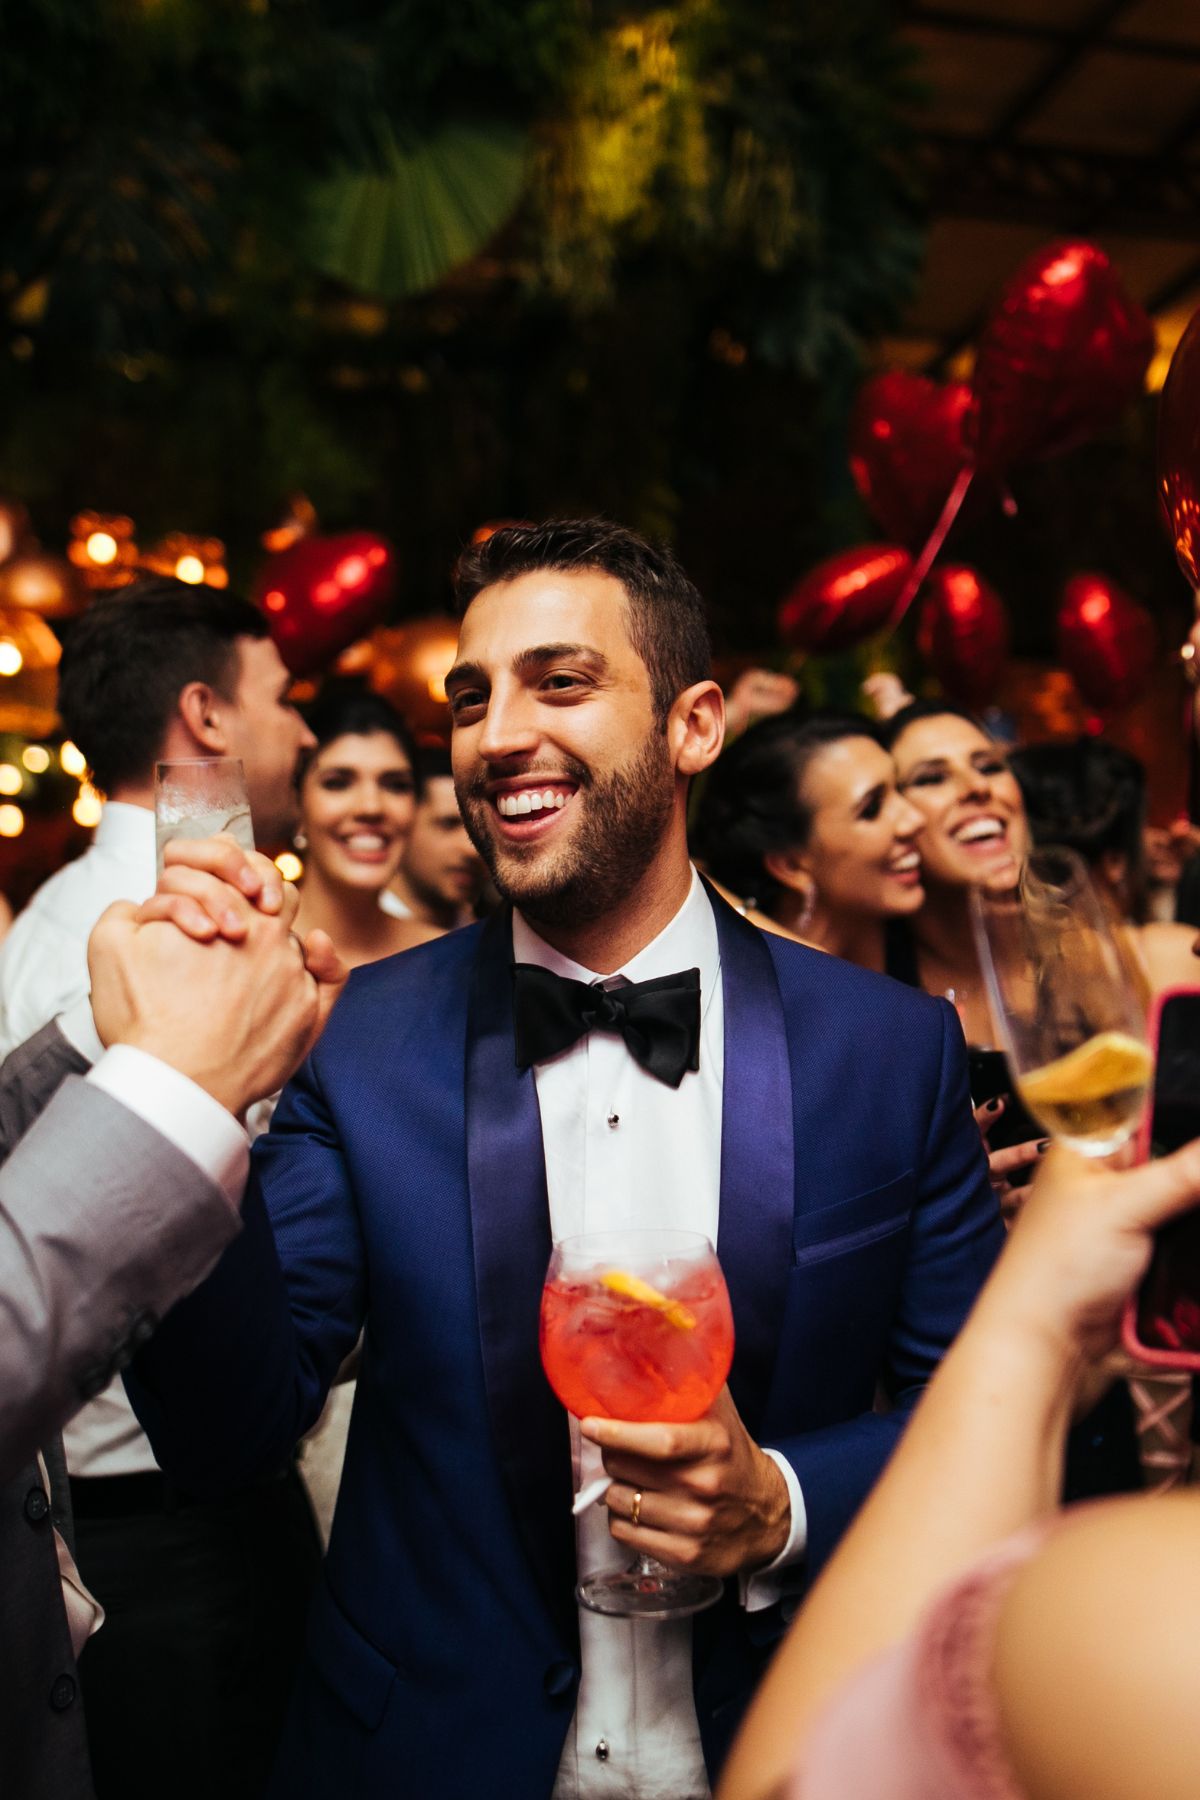 How to Entertain Wedding Guests